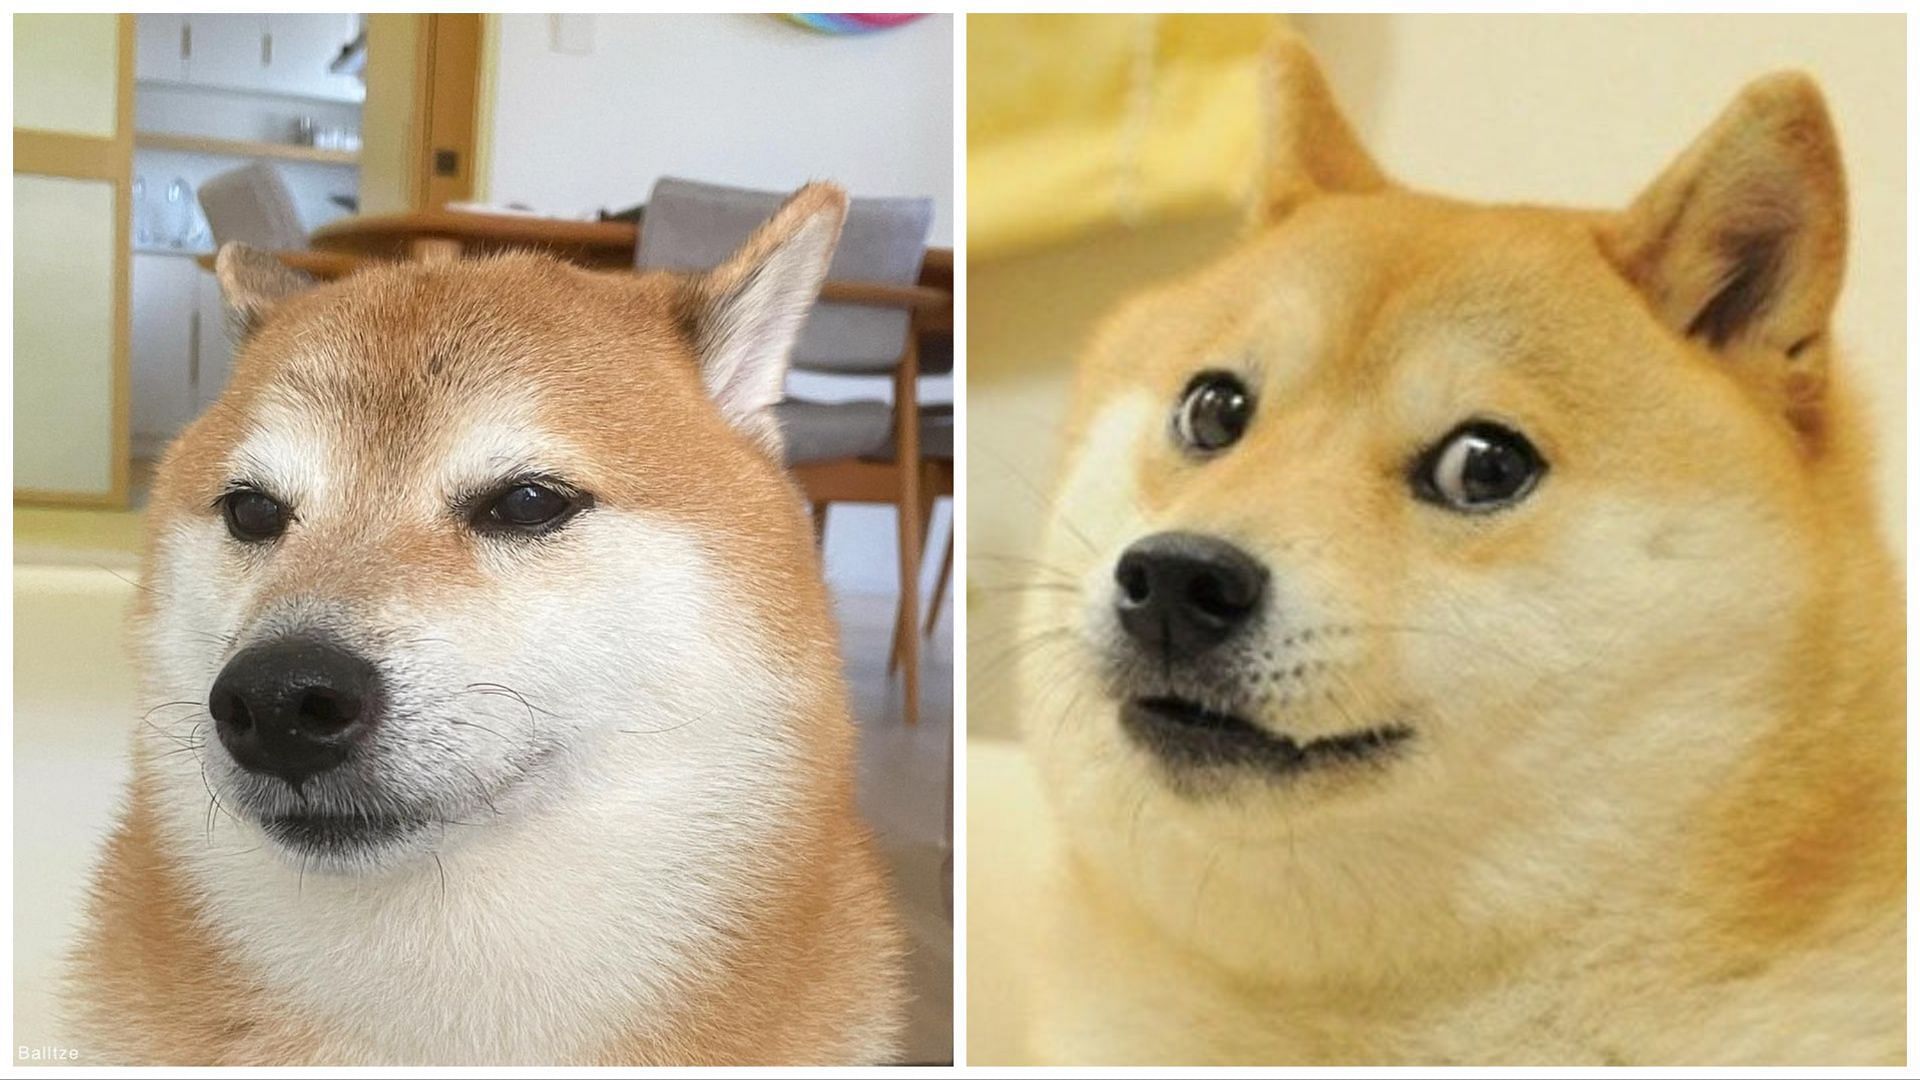 Doge Is Not Dead: Internet-Famous Dog Alive and Well After April Fools' Hoax